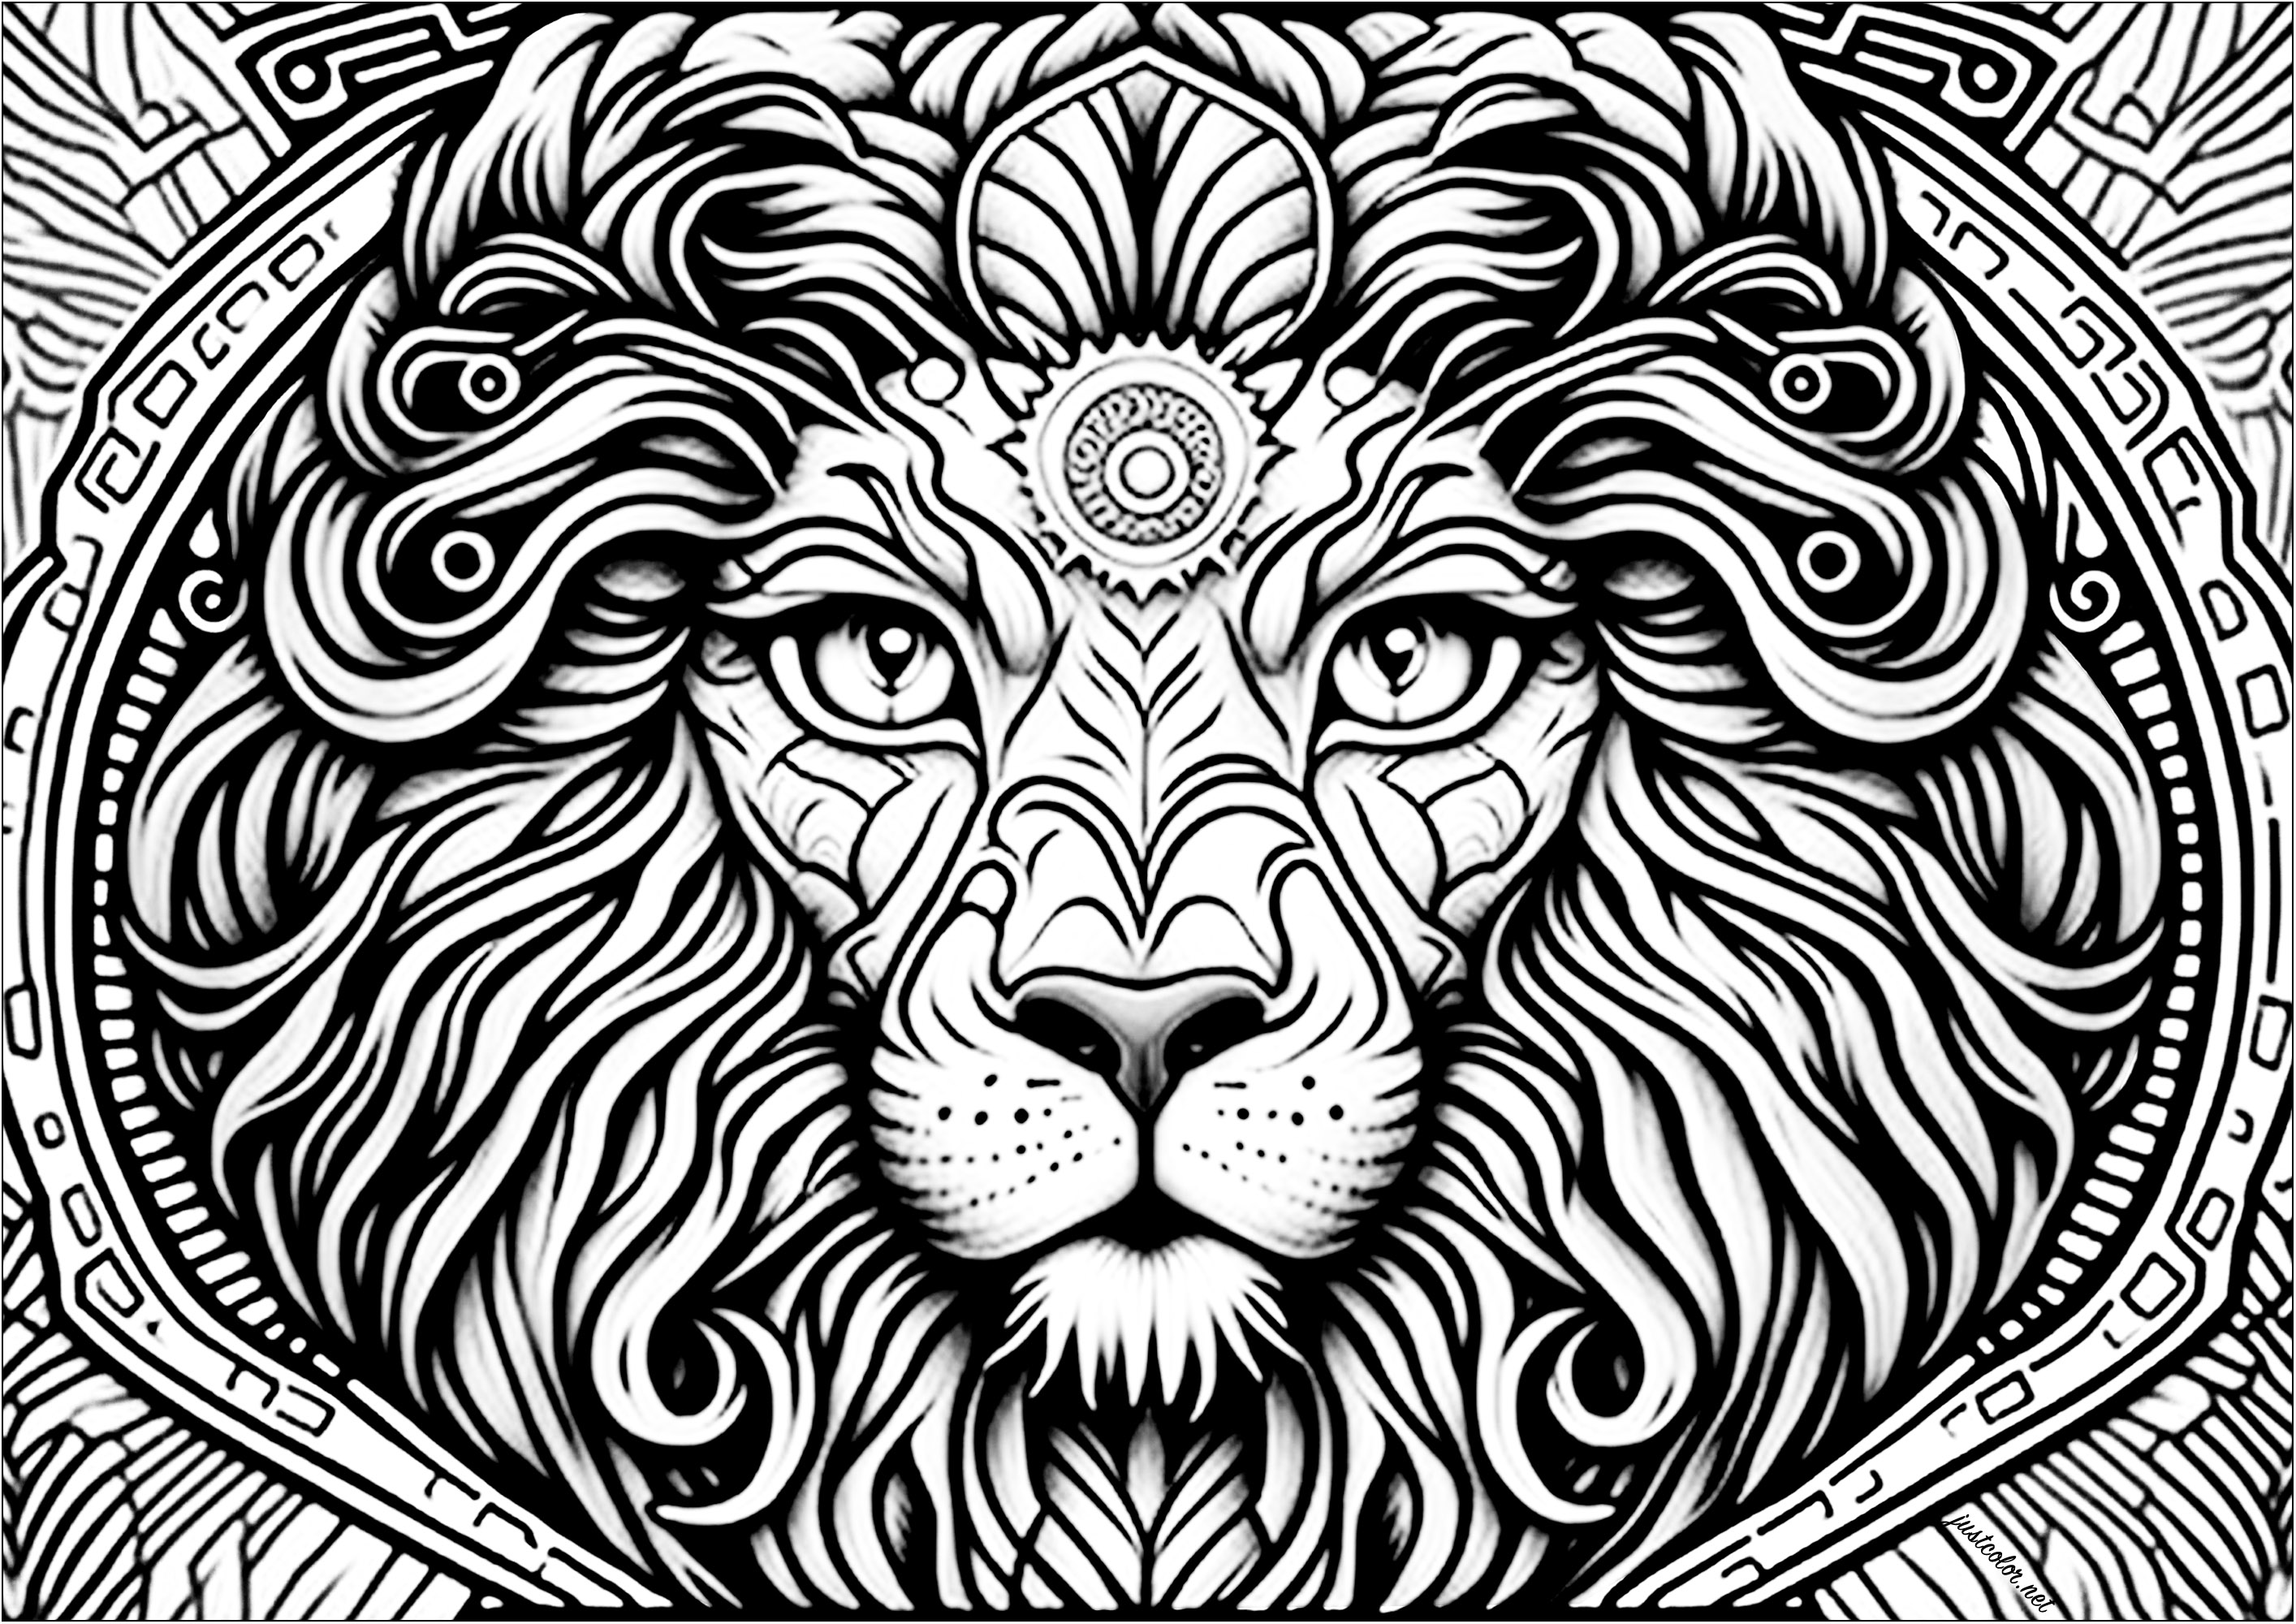 Lion head seen from the front, with many details. This beautiful coloring page represents a lion's head seen from the front, with many details.
The eyes are wide open and the gaze is piercing. The mane is full and wavy, and blends with the abstract details of the background.